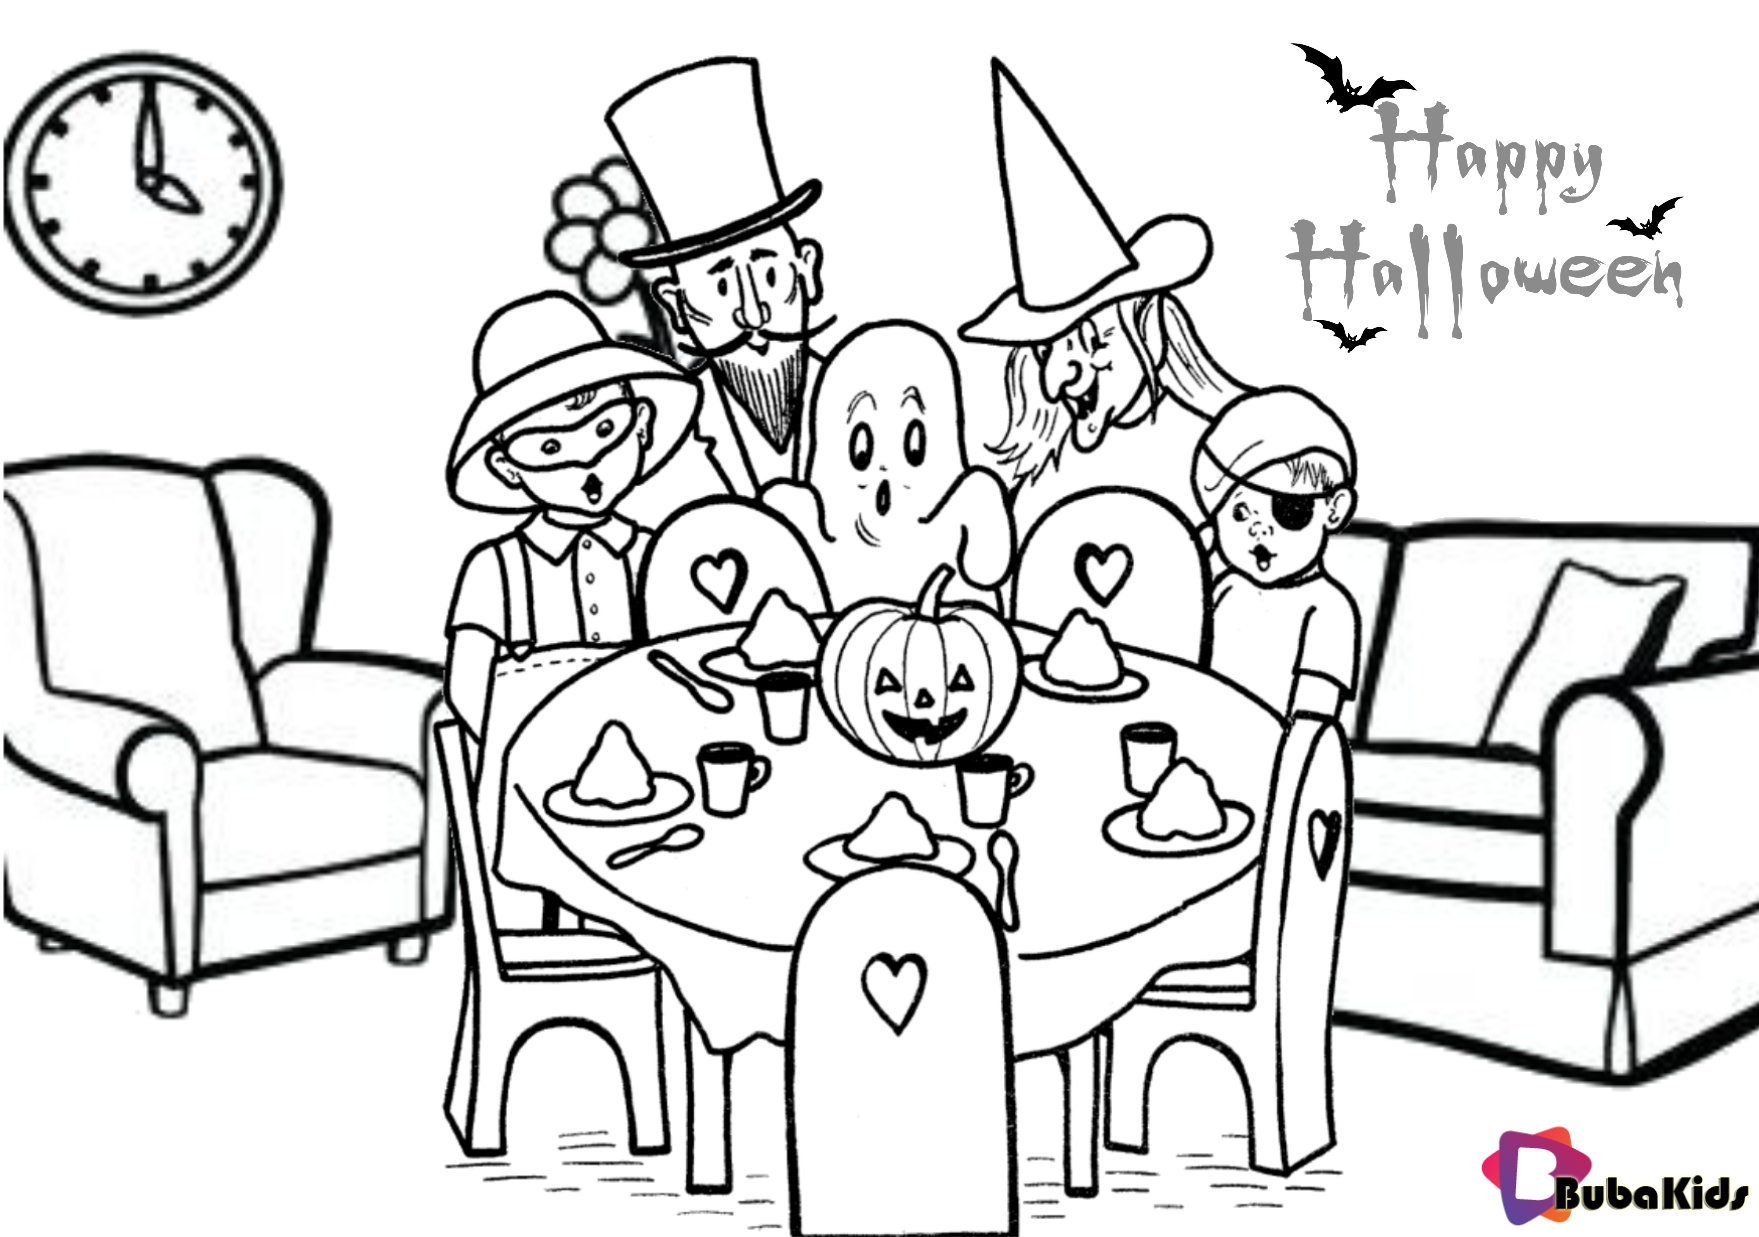 Halloween party free printable coloring pages. Wallpaper